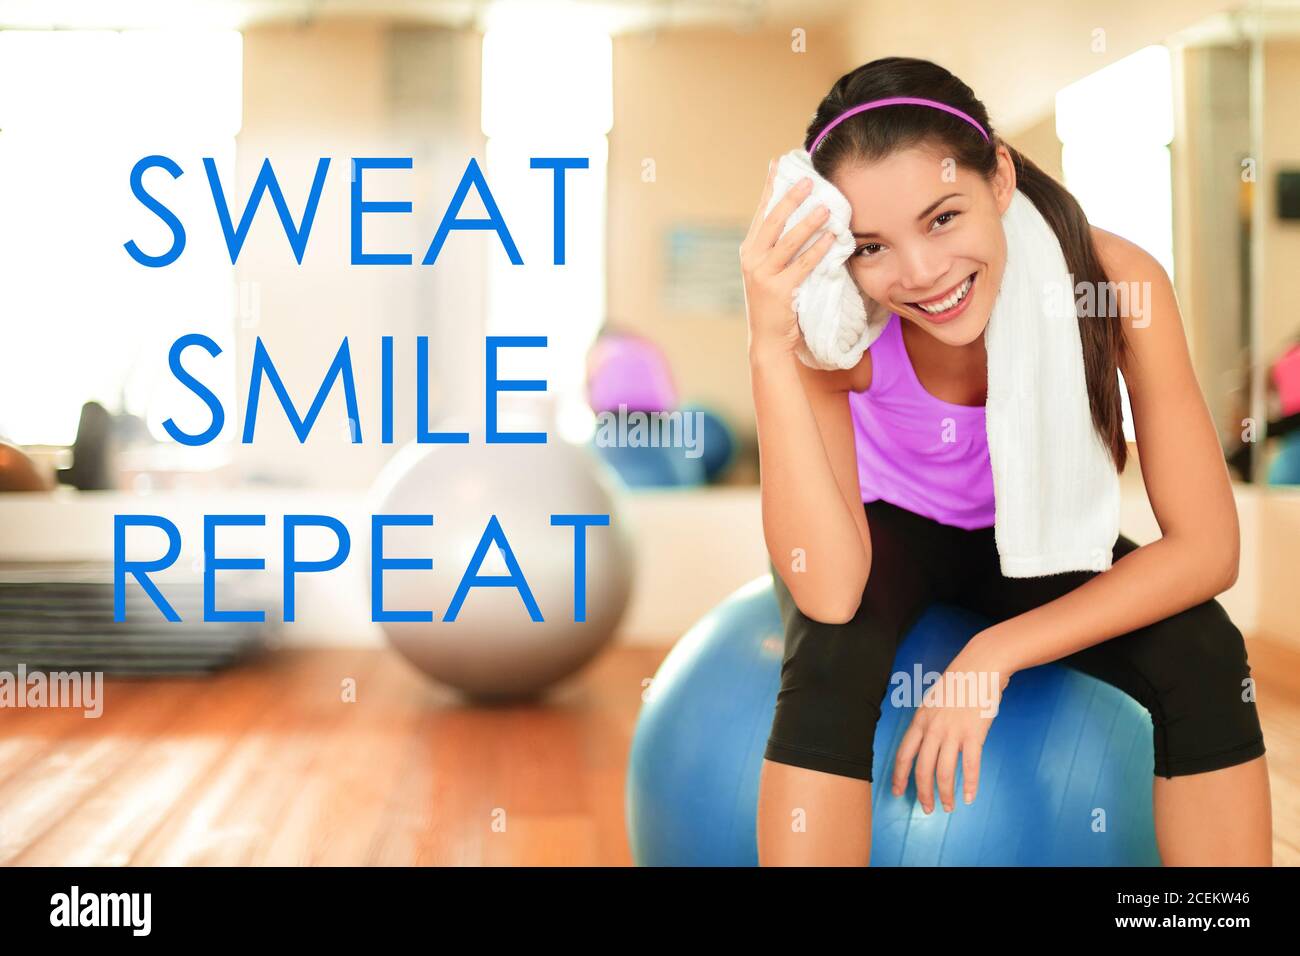 Fitness motivational quote for weight loss motivation. Words SWEAT SMILE REPEAT on gym background with fit Asian woman sweating doing exercise Stock Photo